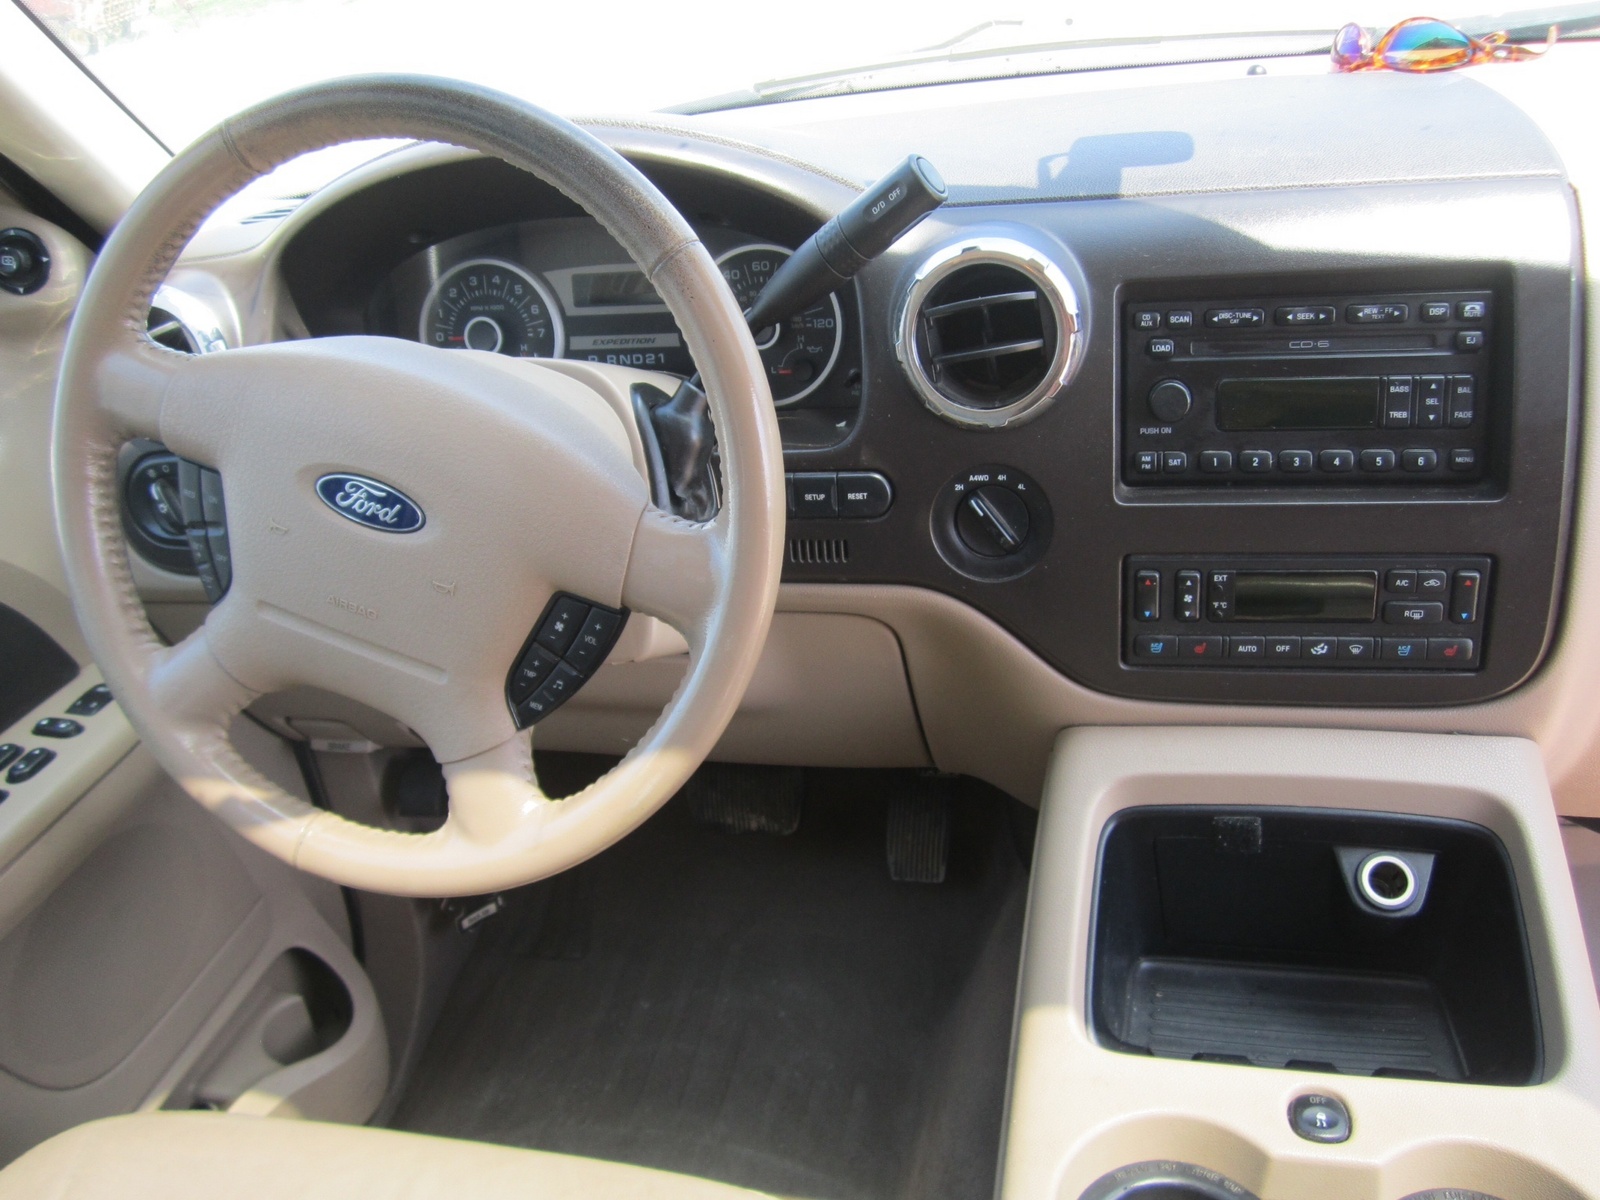 2005 Ford expedition interior photos #4